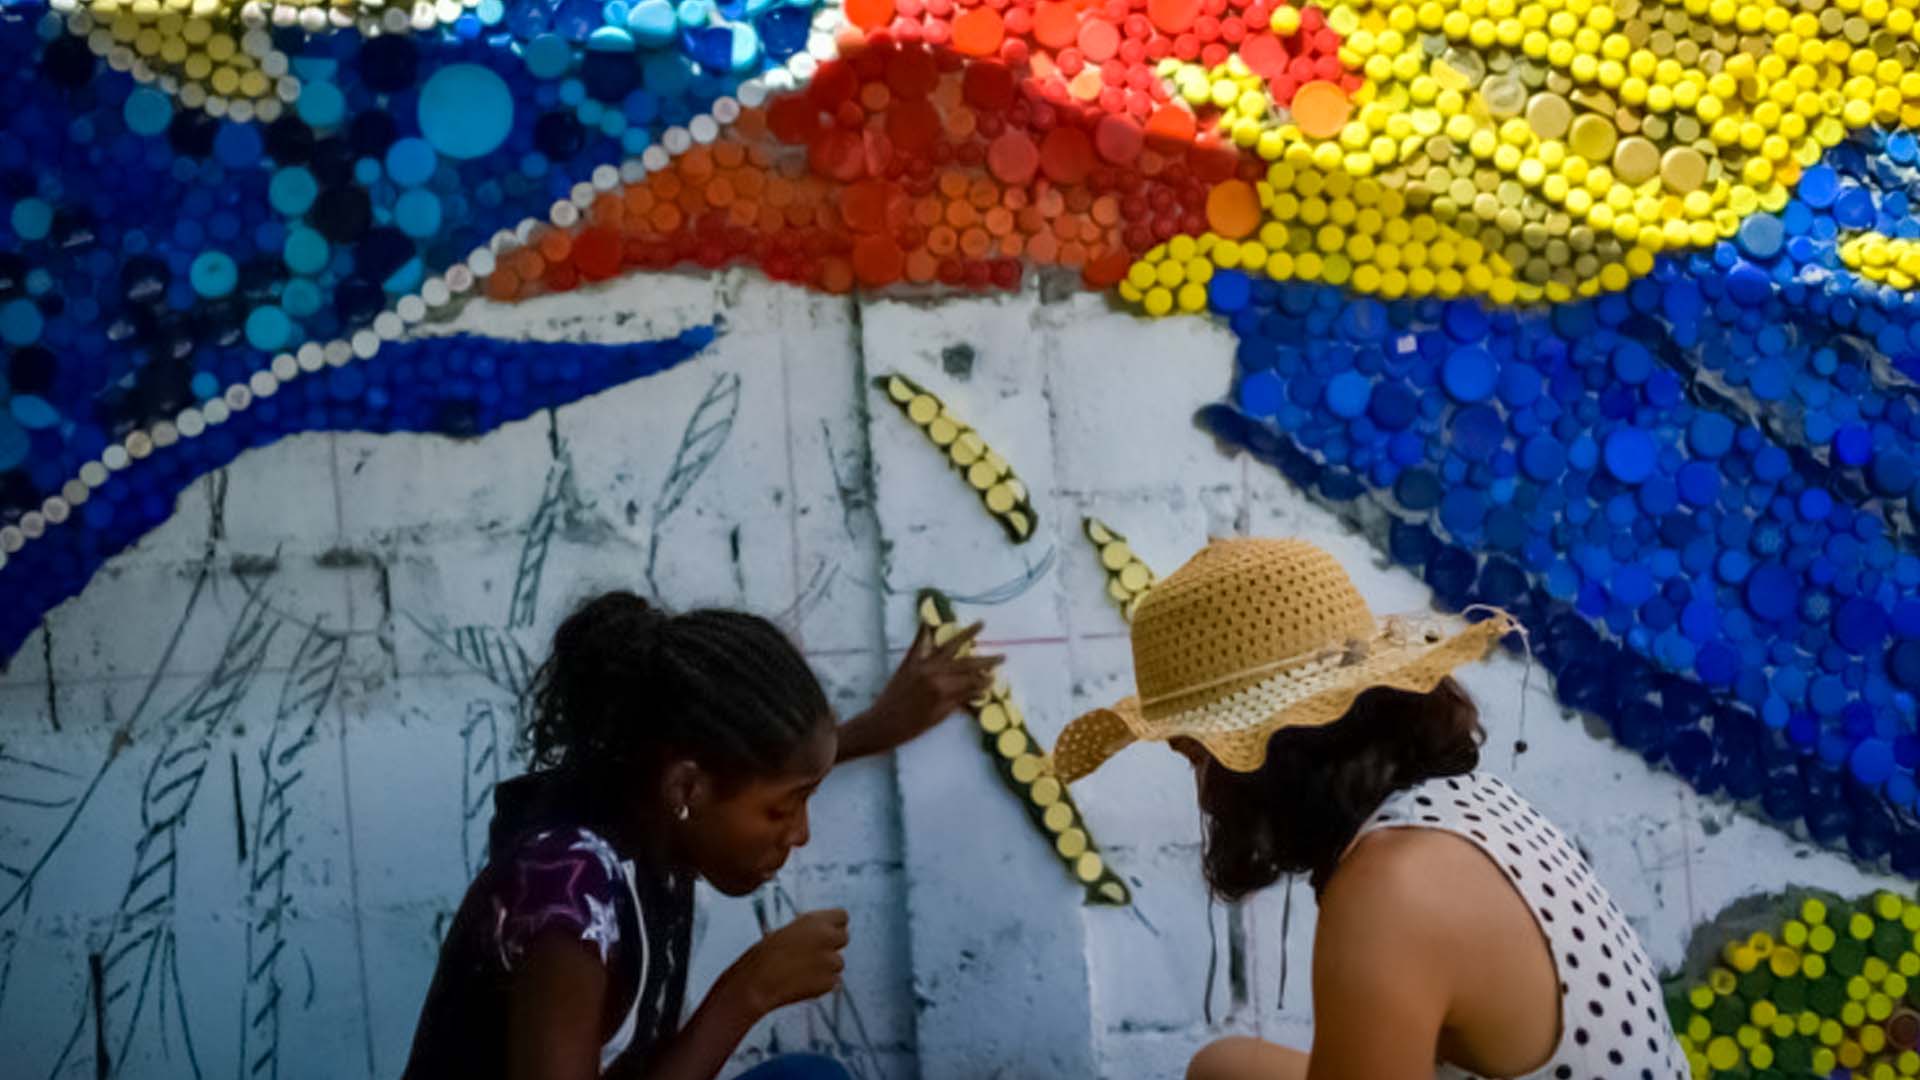 Caracas suburb is lit up by a Venezuelan mural artist using recycled plastic